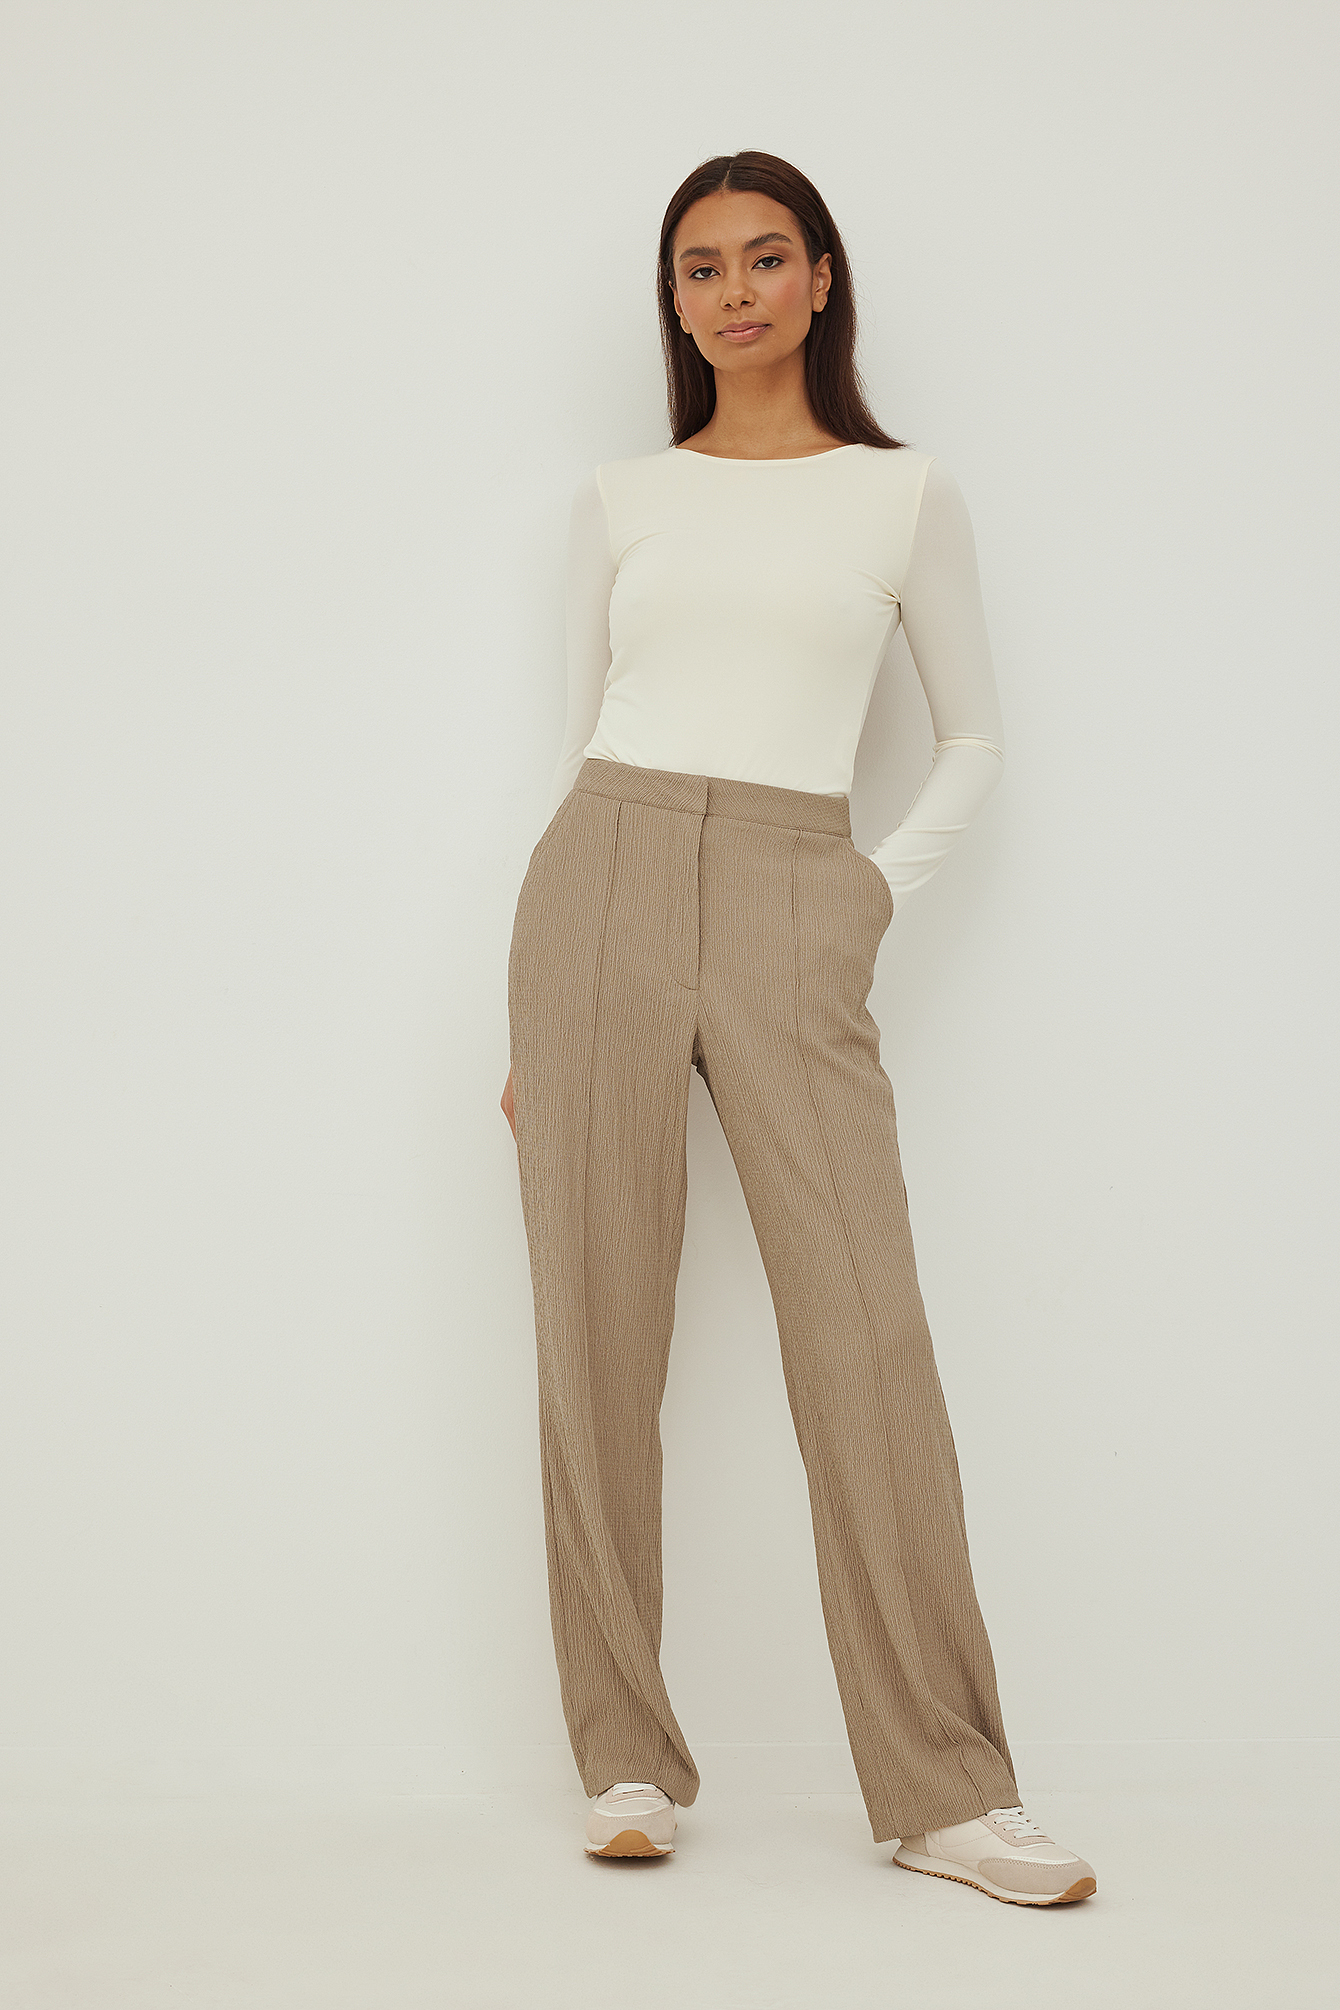 Recyled Structured Seamline Suit Pants Outfit.